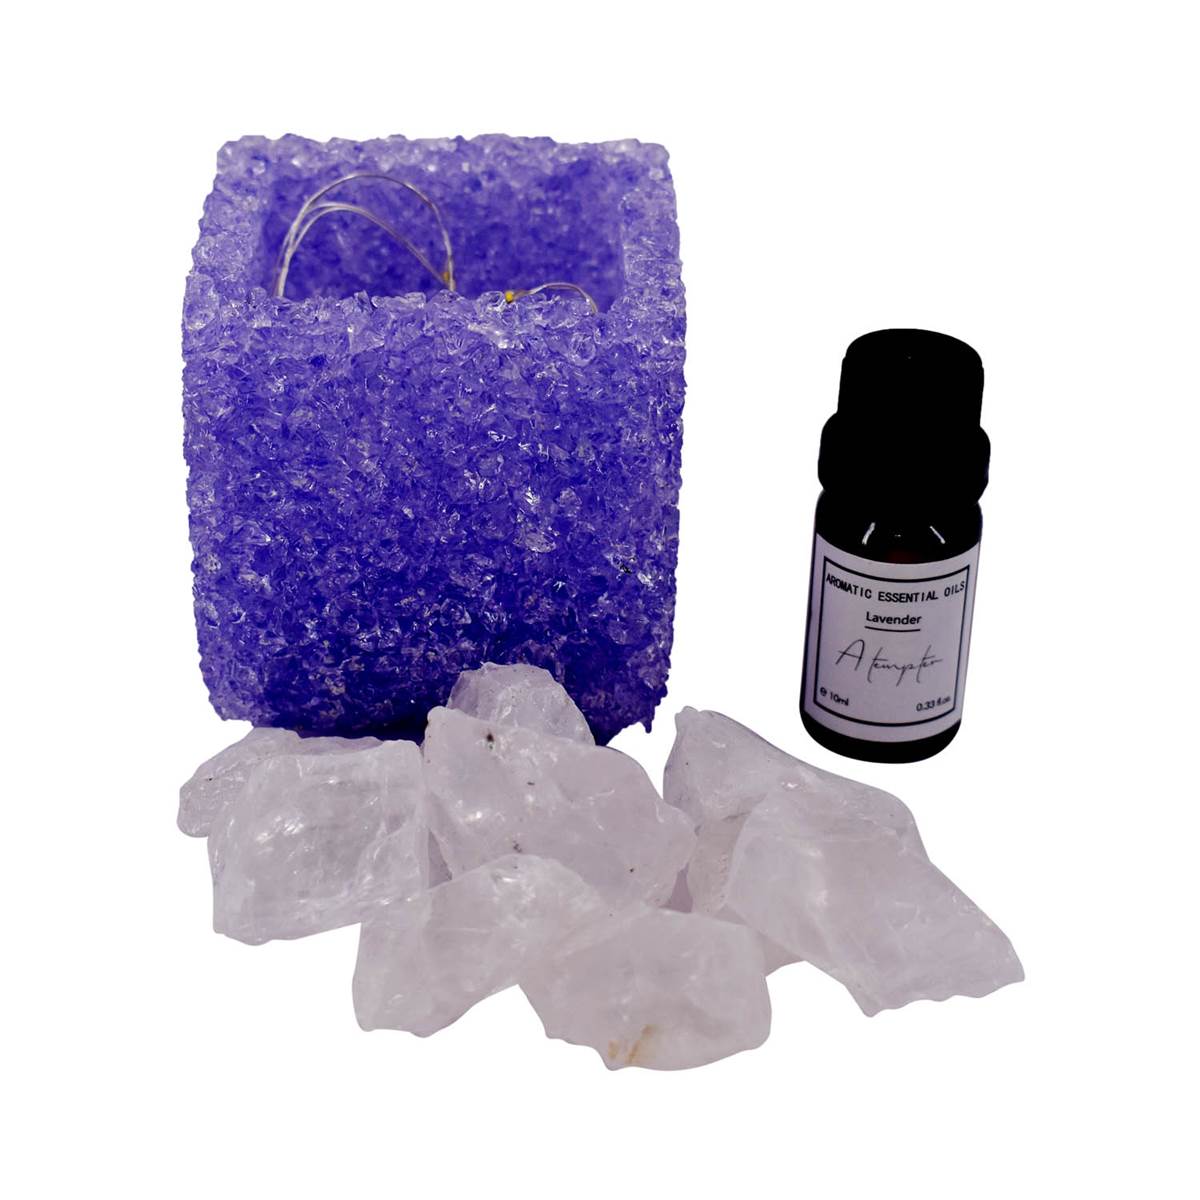 Natural Crystal Aromatherapy with Essential Oil, Electric Diffuser (087-5-B)